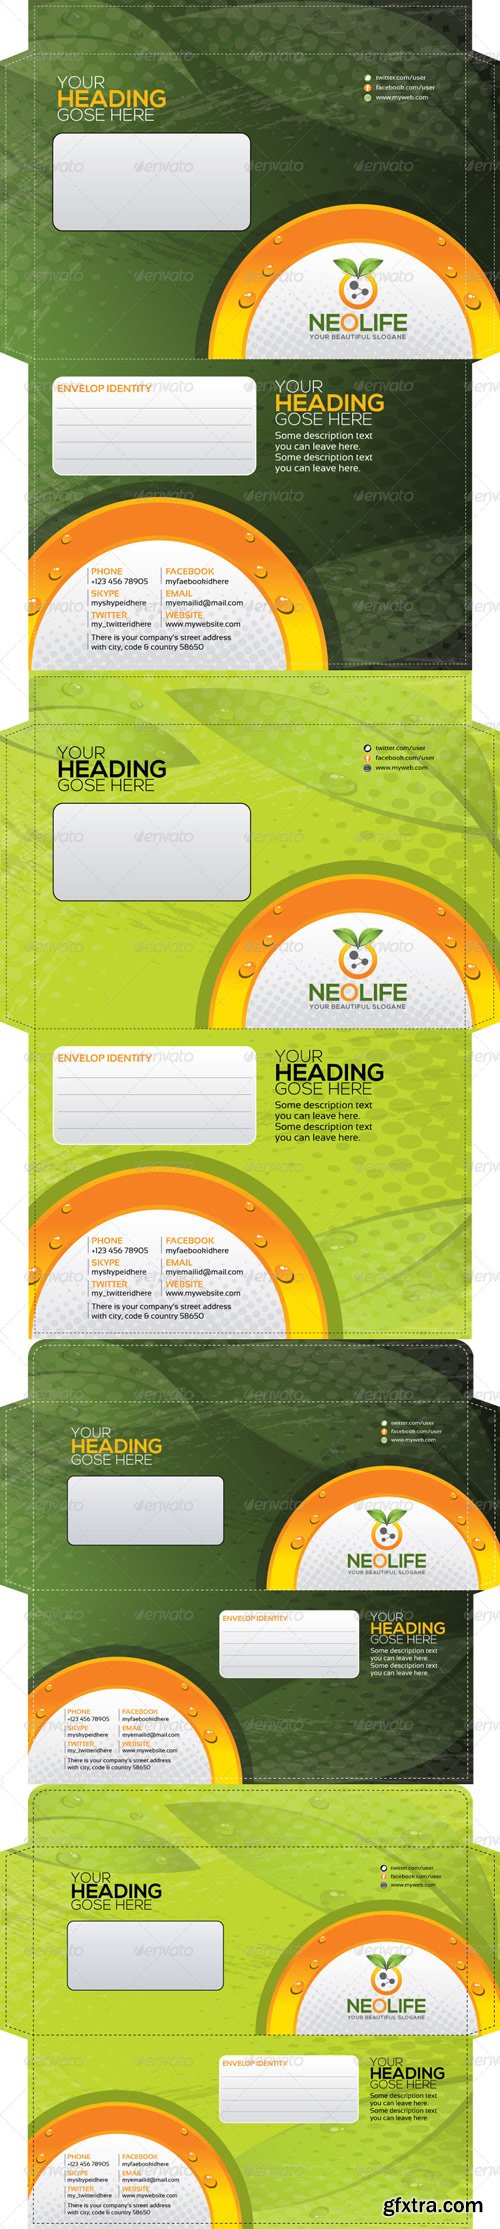 GraphicRiver - Neolife Envelop Packaging - 6489000